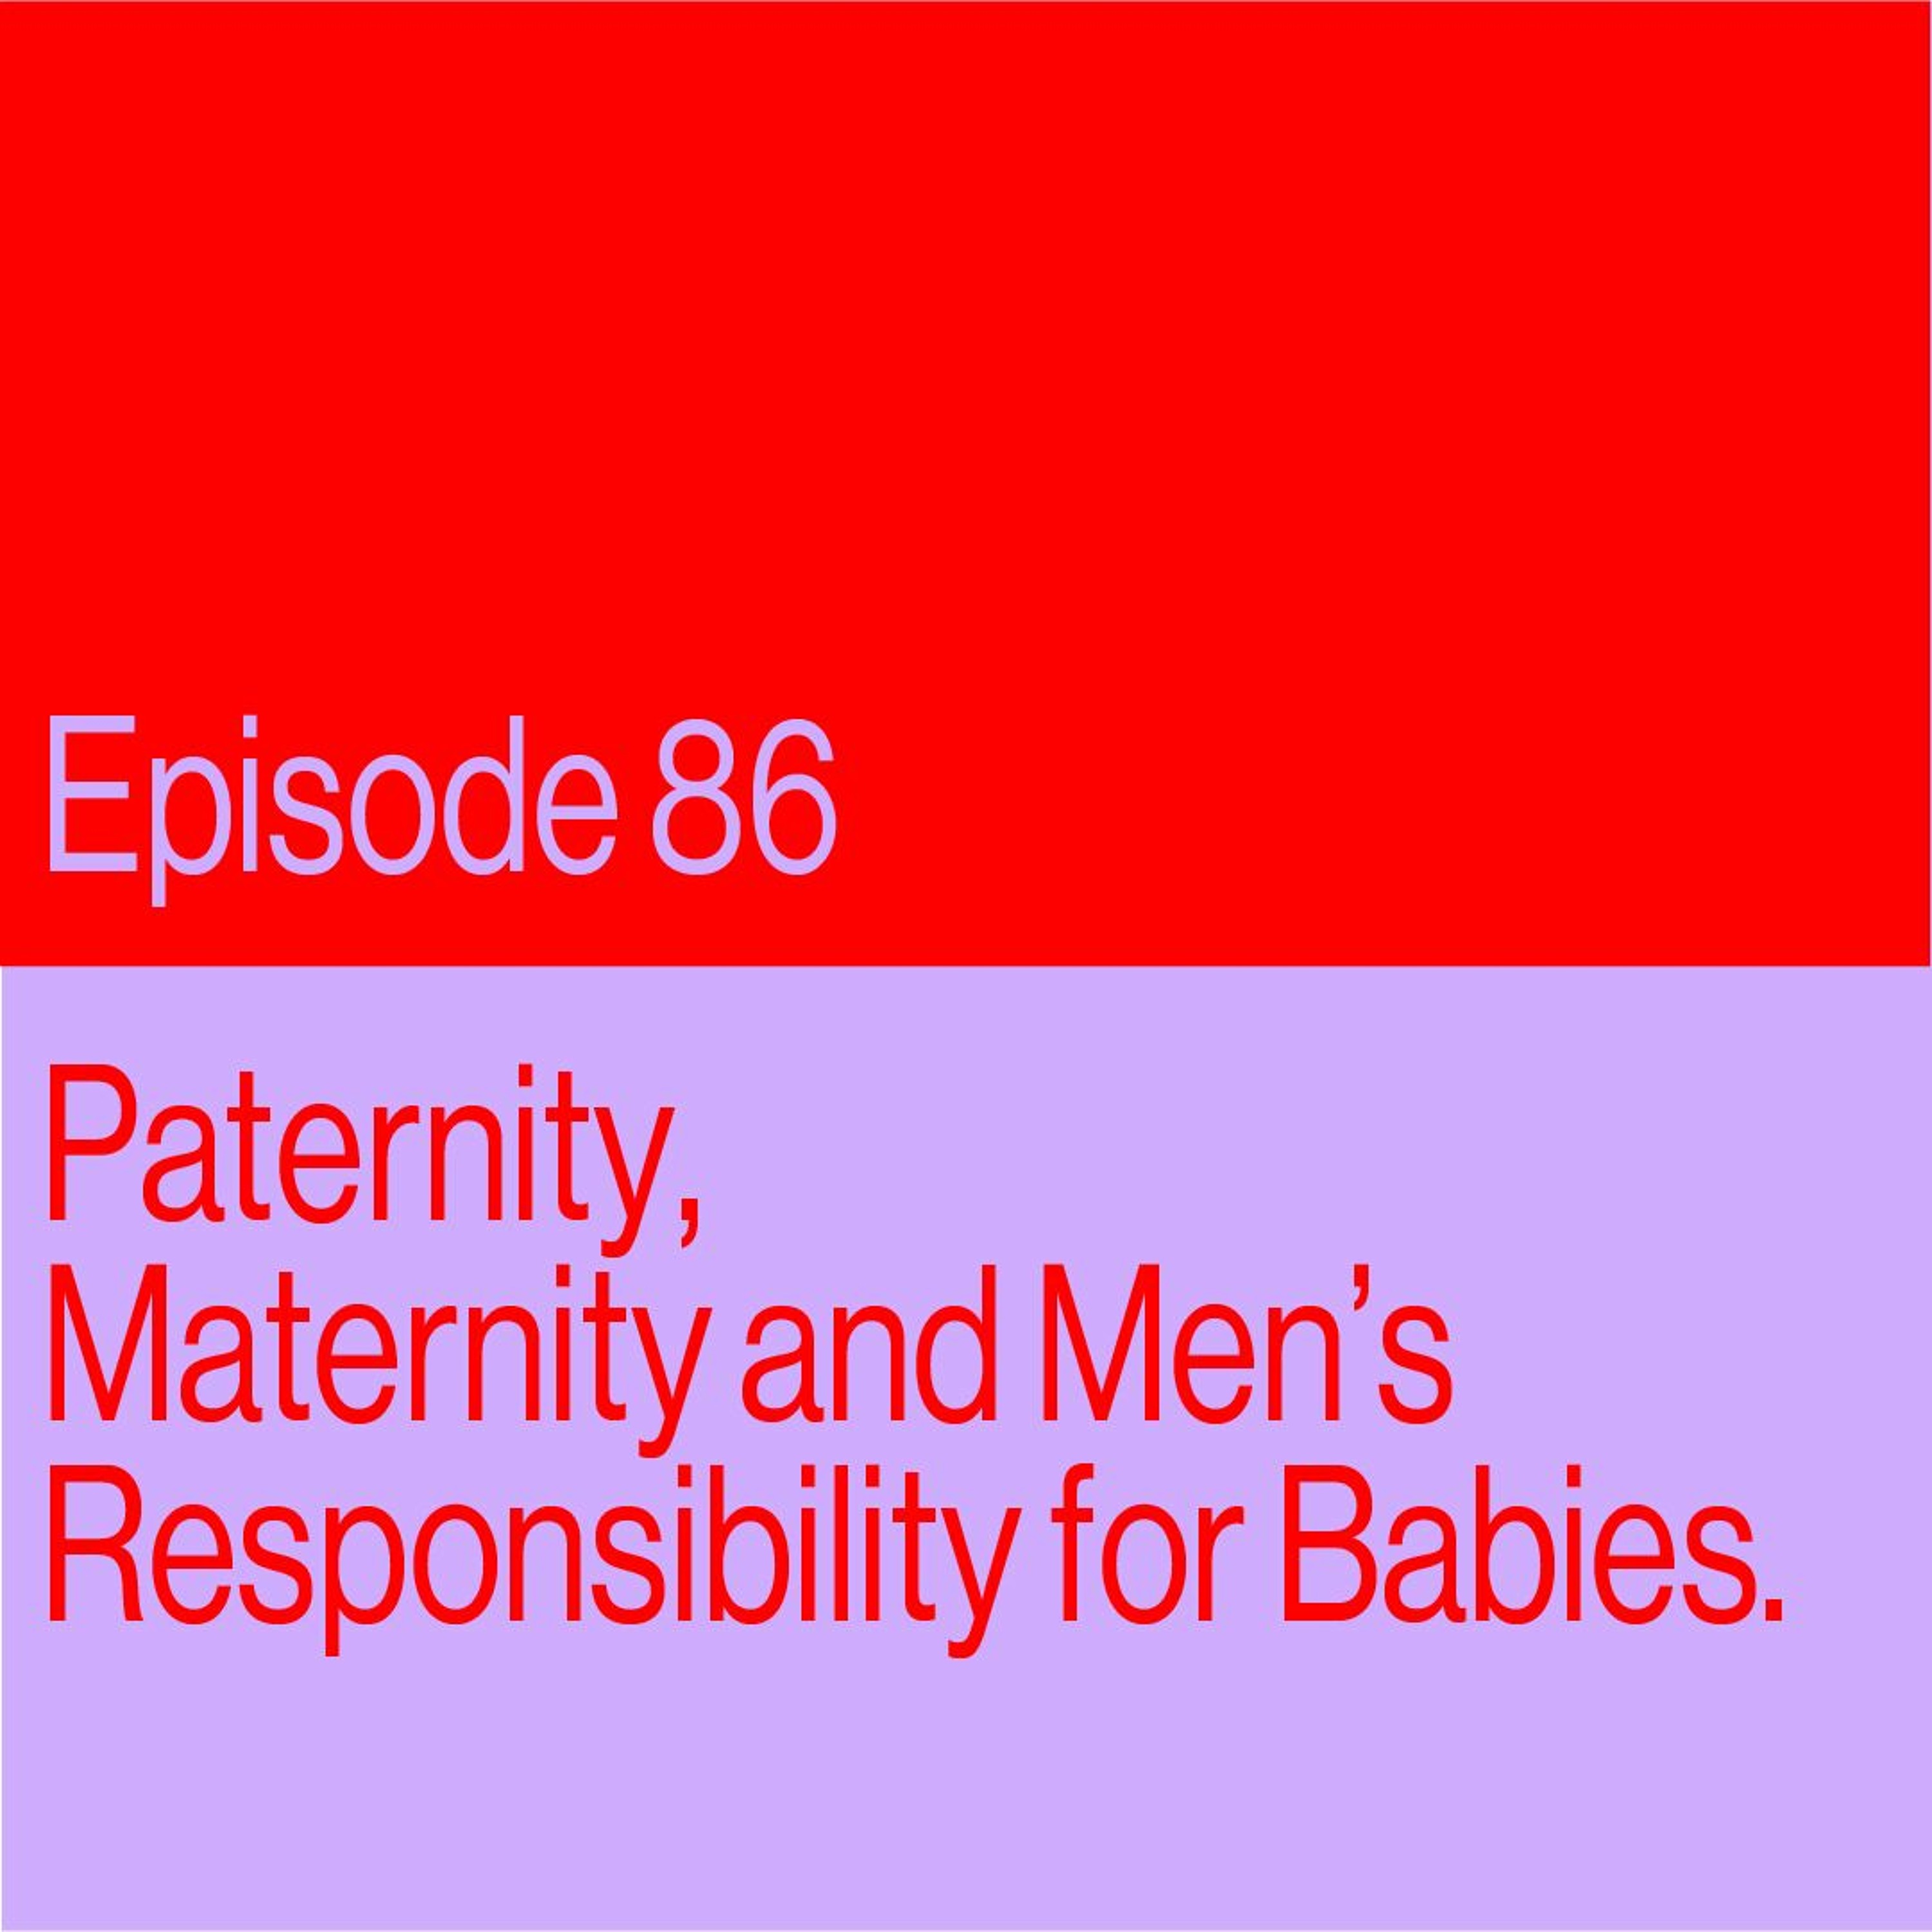 Episode 86: Paternity, Maternity And Men's Responsibility For Babies